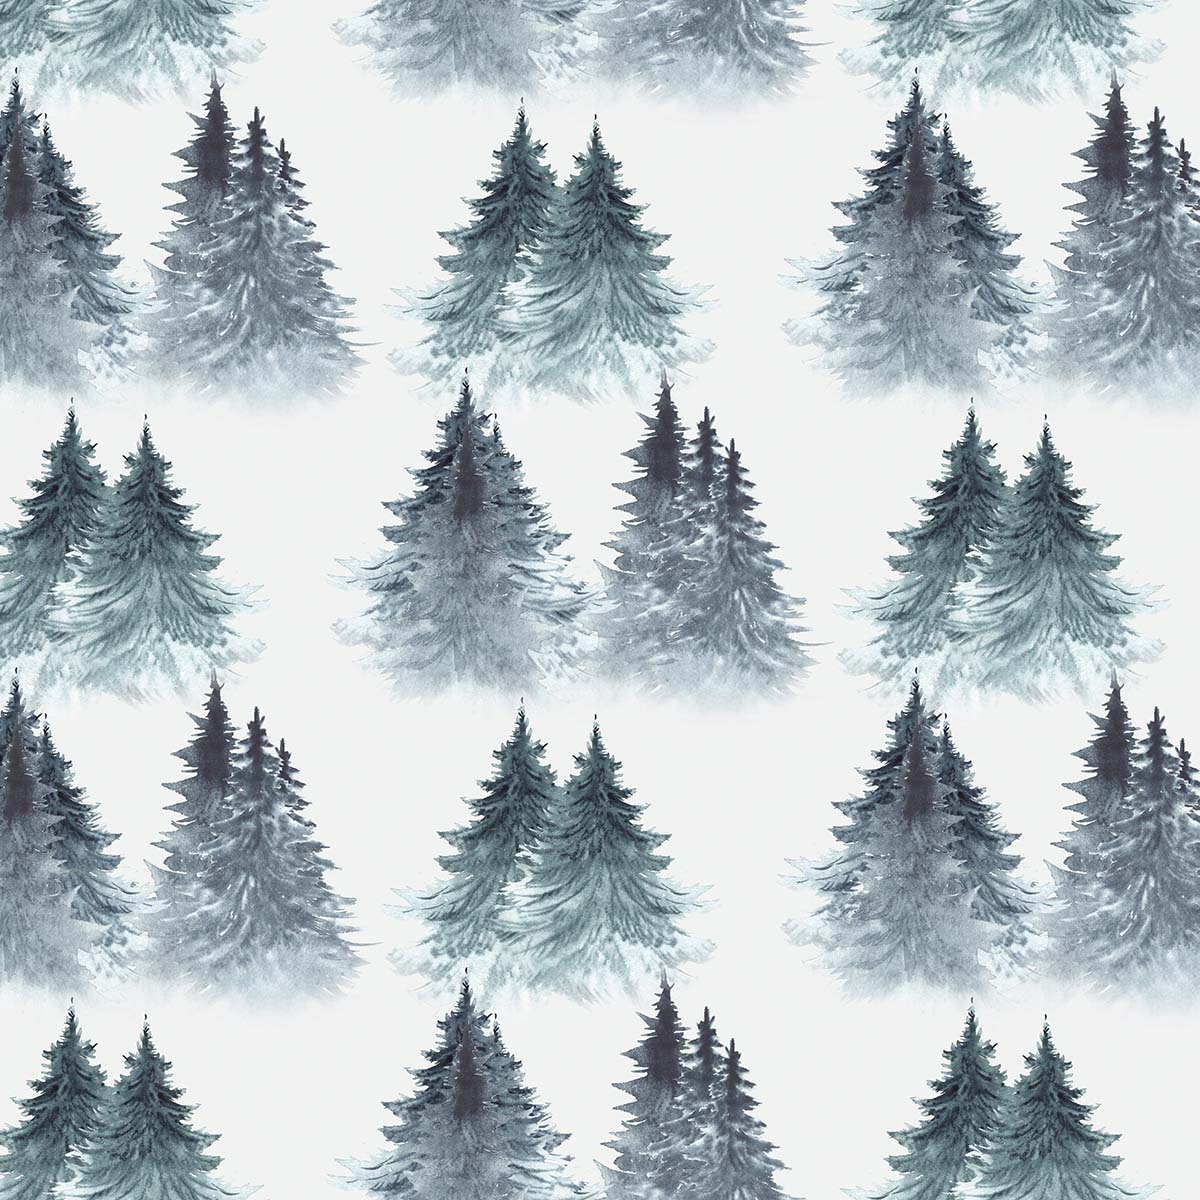 A pattern of trees on a white background